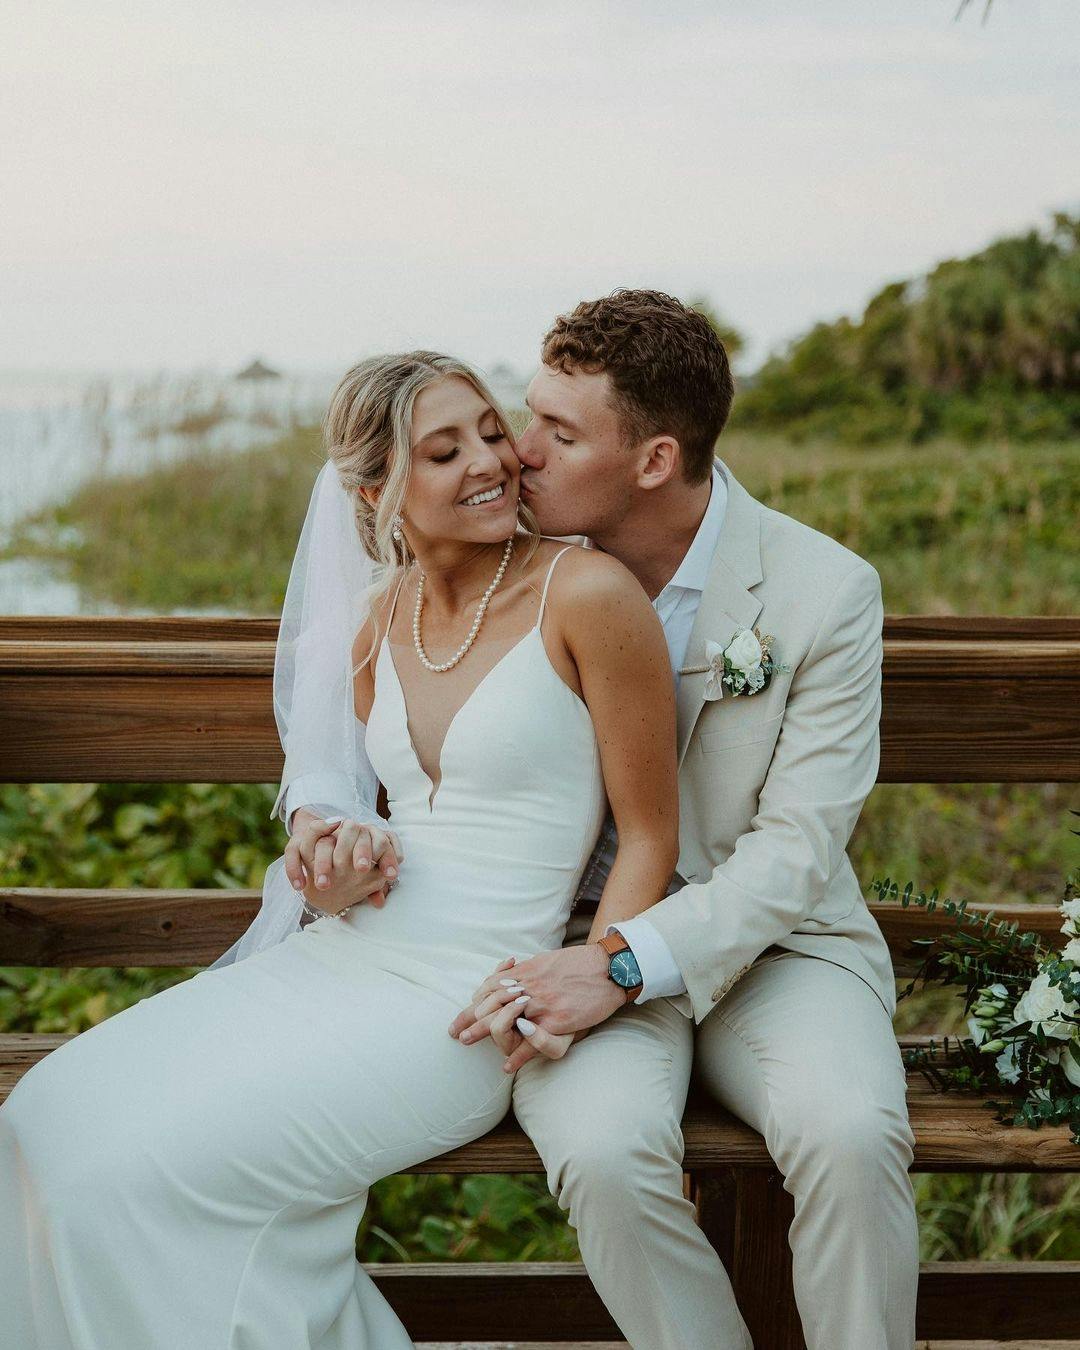 Minimalist bride and groom in simple v neck wedding dress and pearl necklace and modern light tan suit.